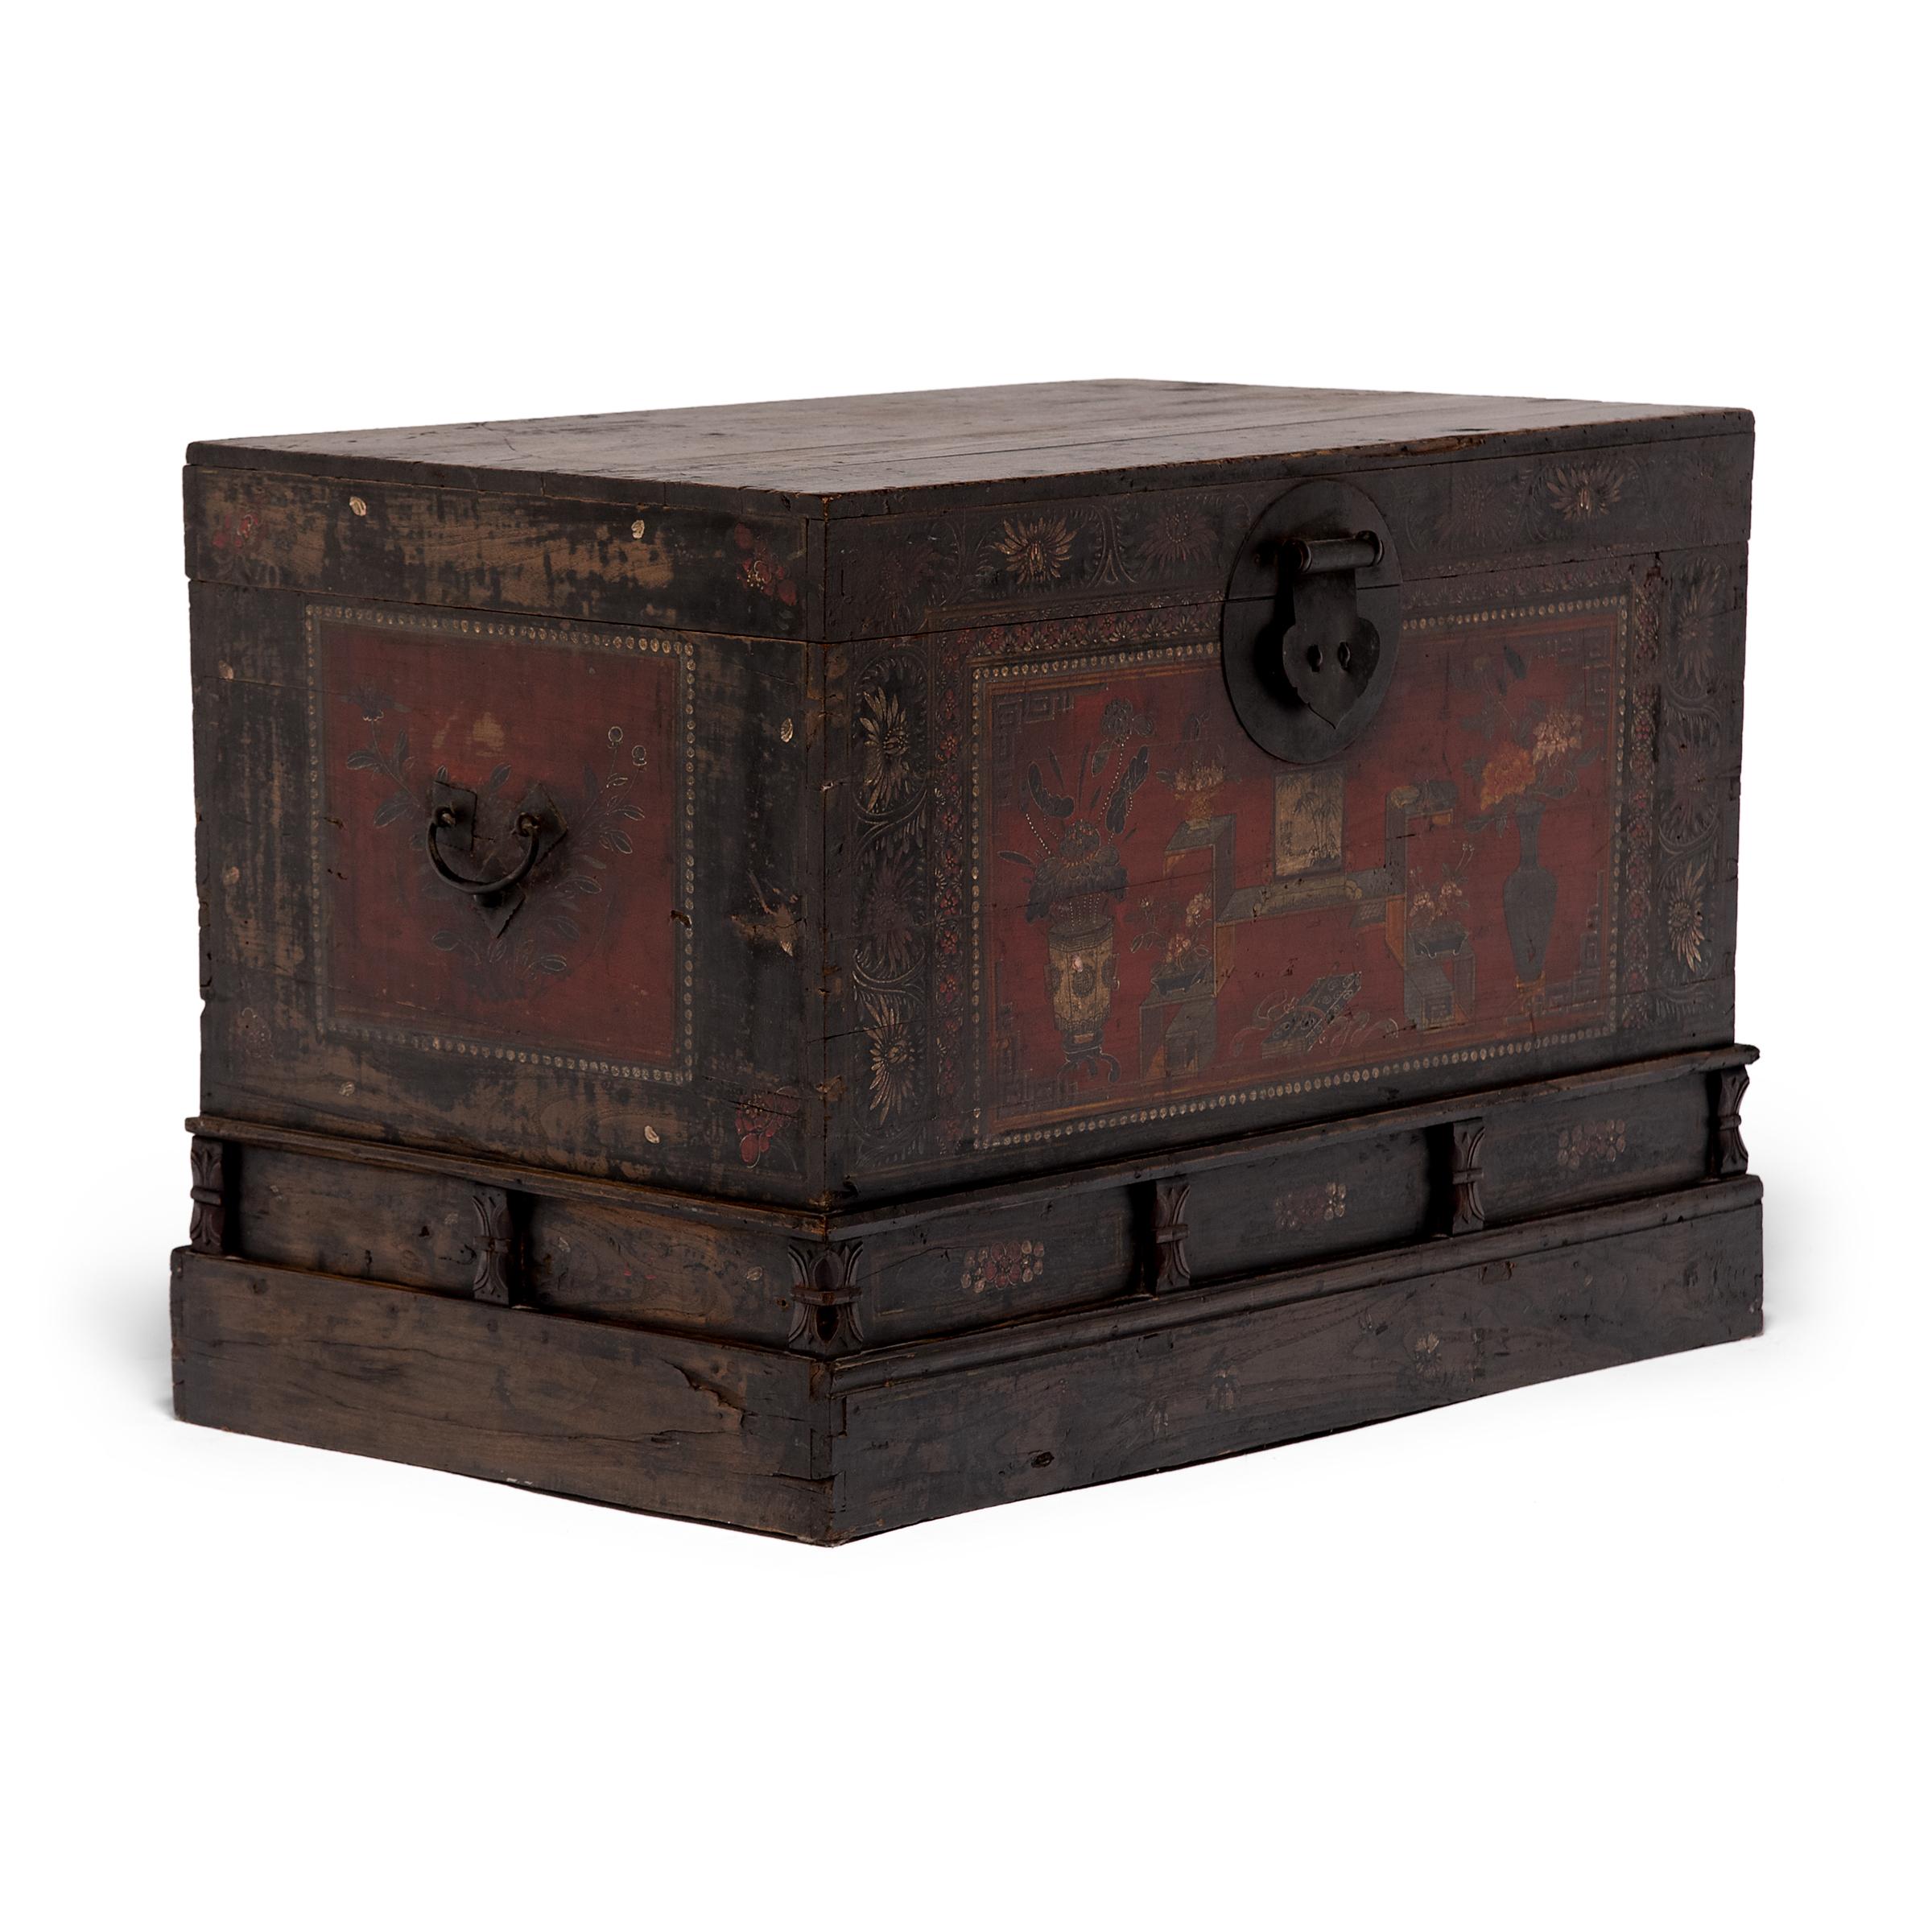 Lacquered Chinese Painted Book Chest, c. 1850